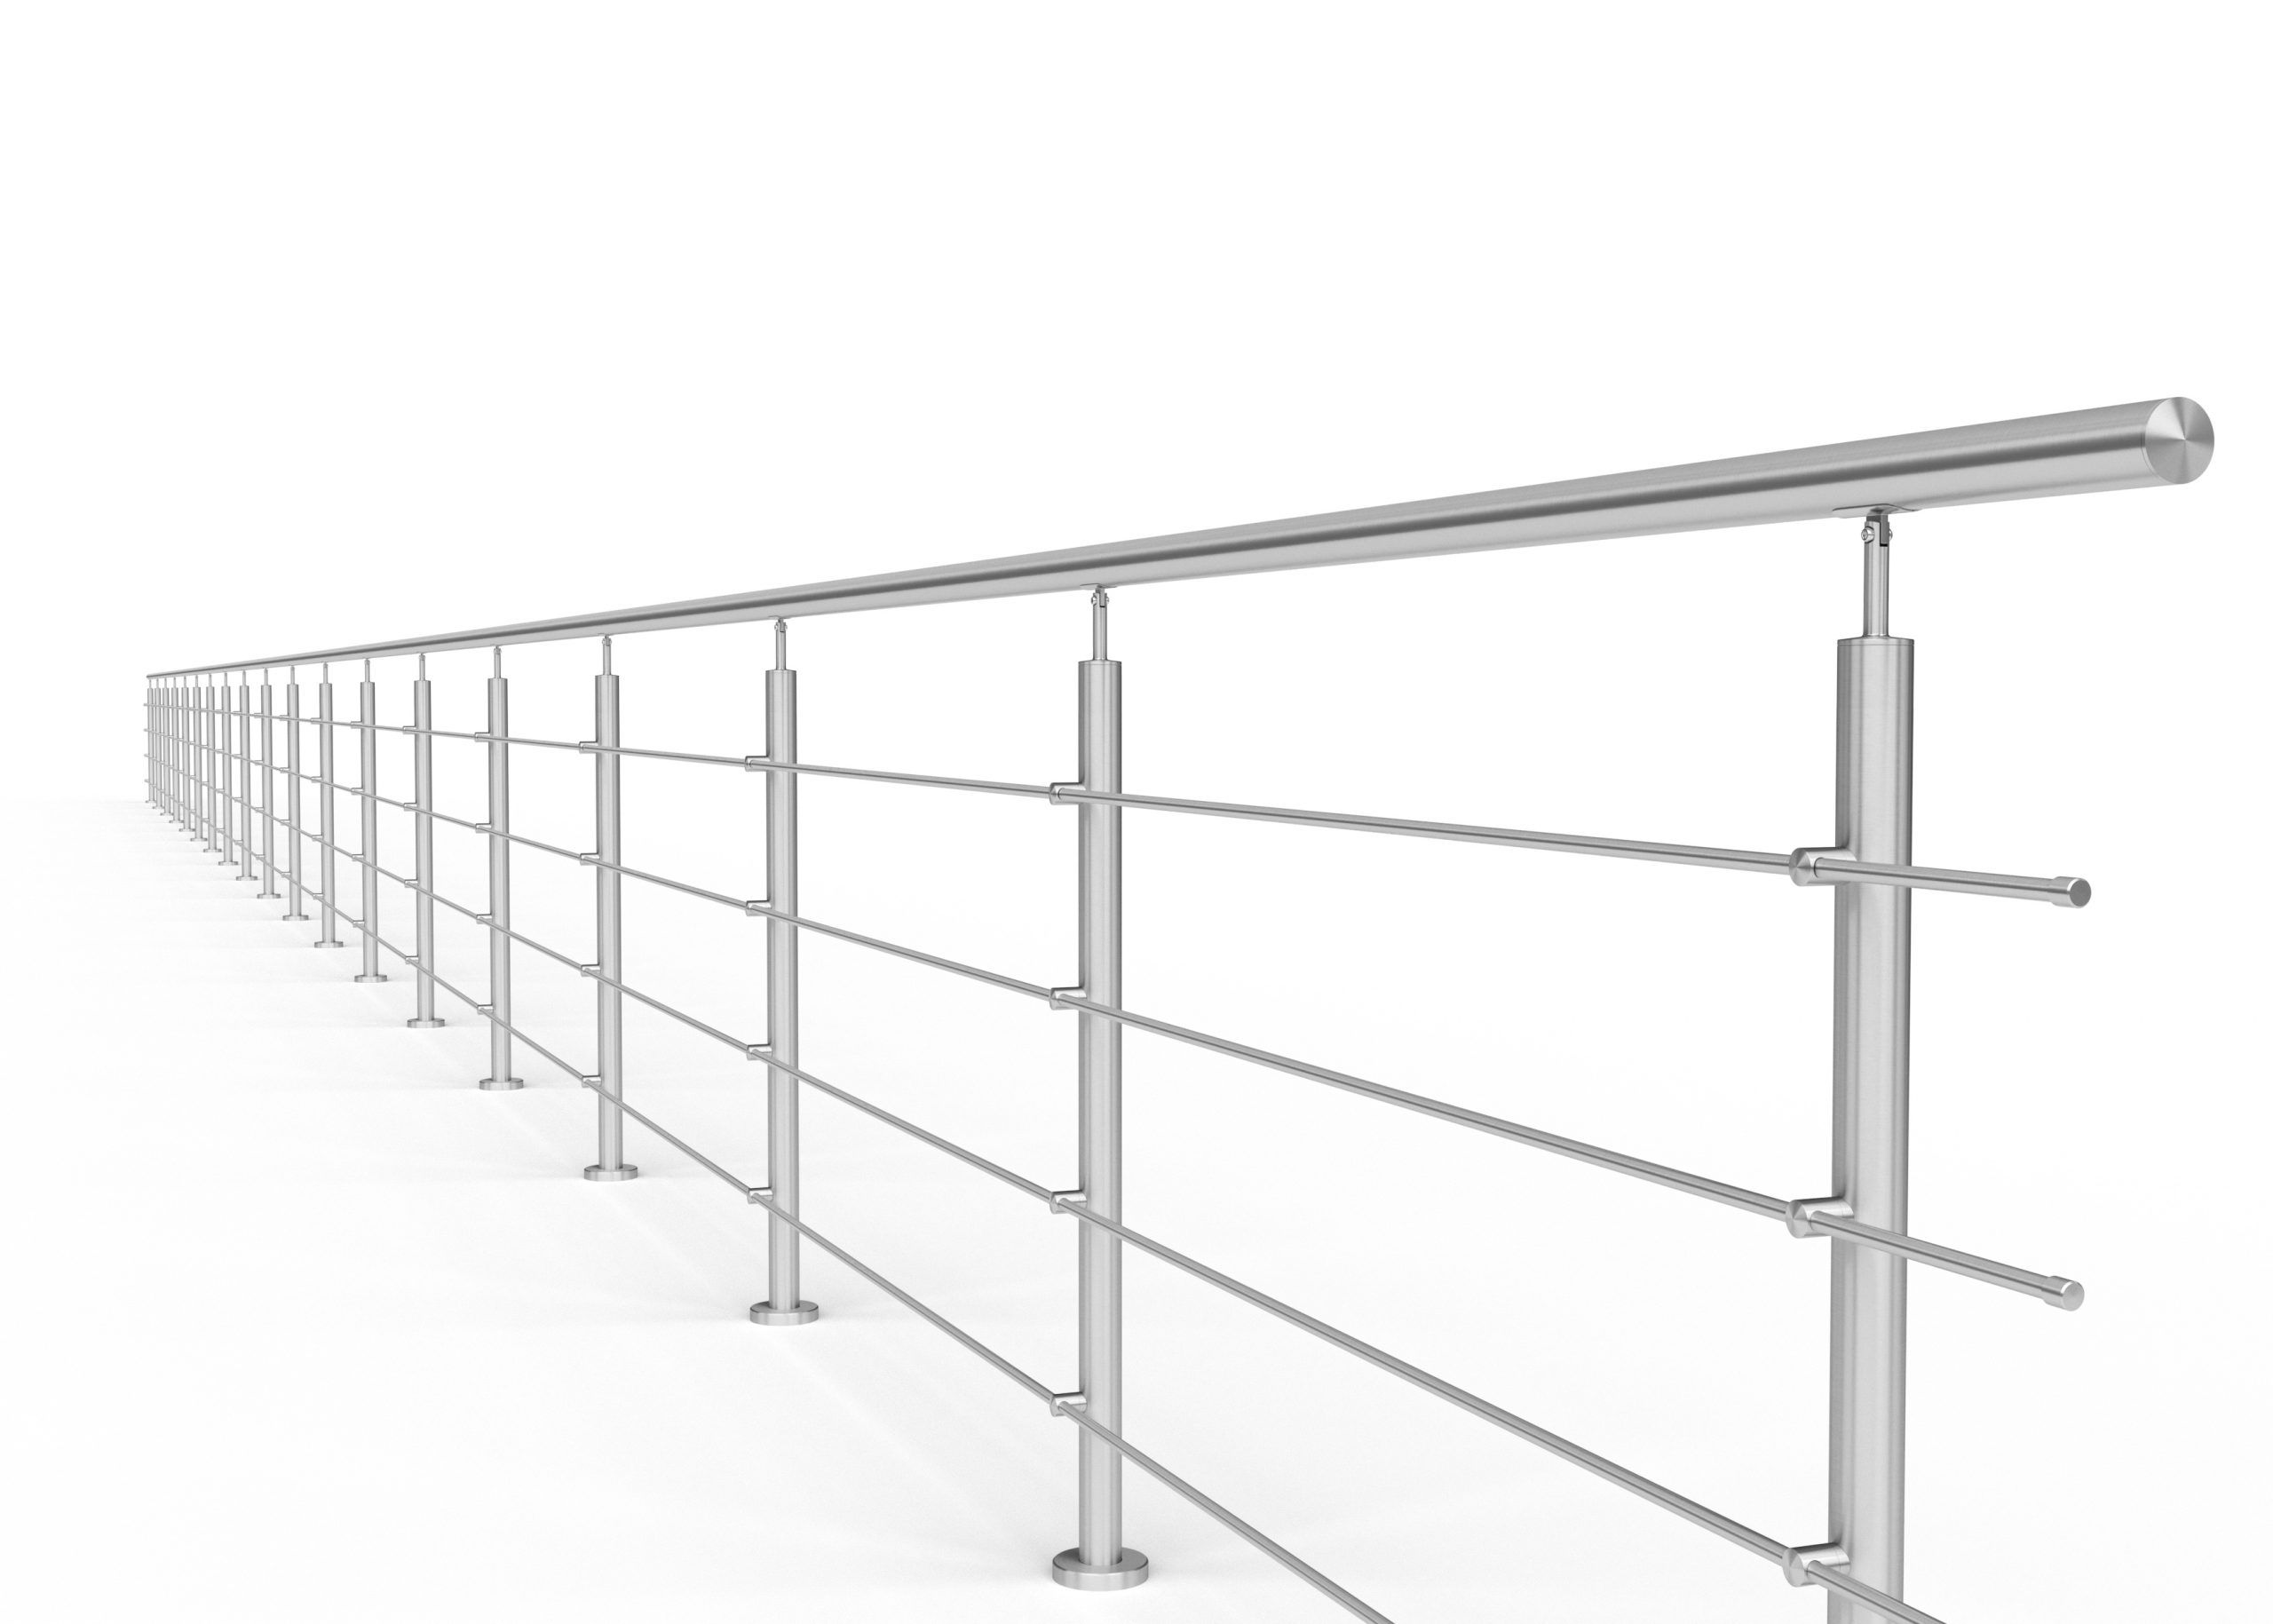 Aluminum balustrades – the most important information